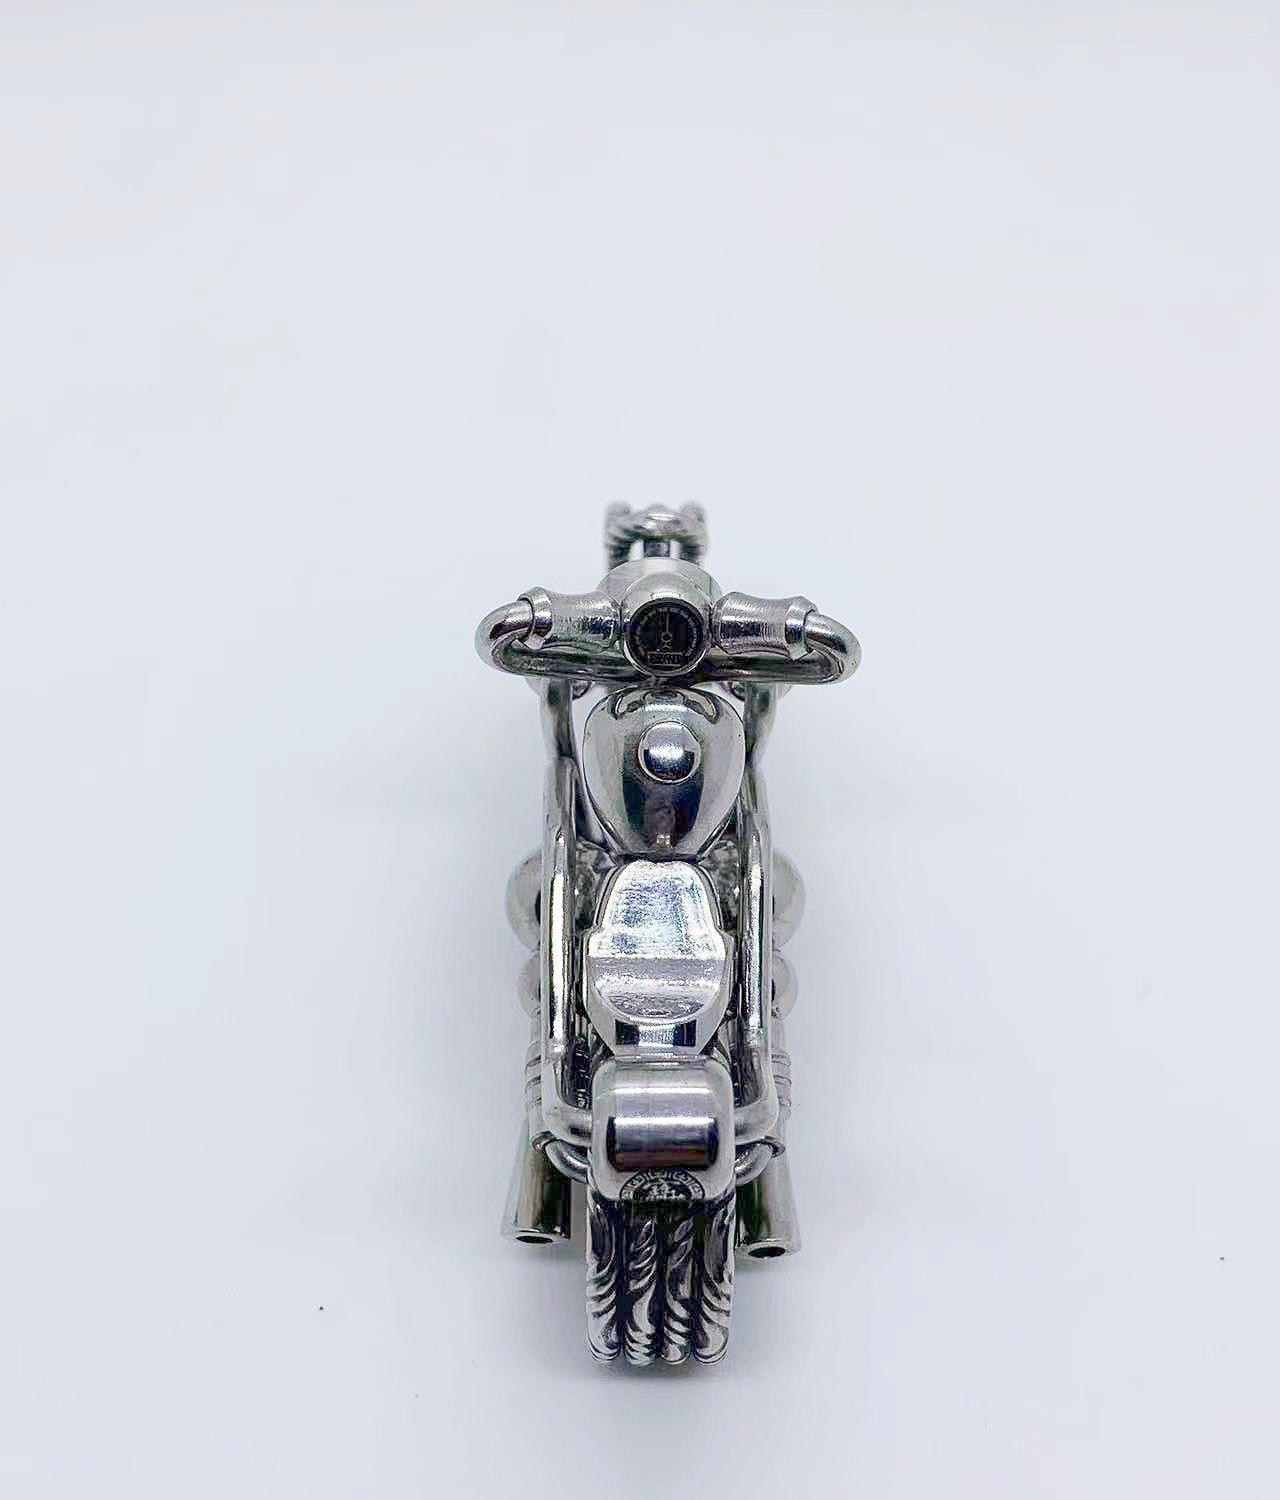 Handmade stainless steel wire for motorcycle keychain